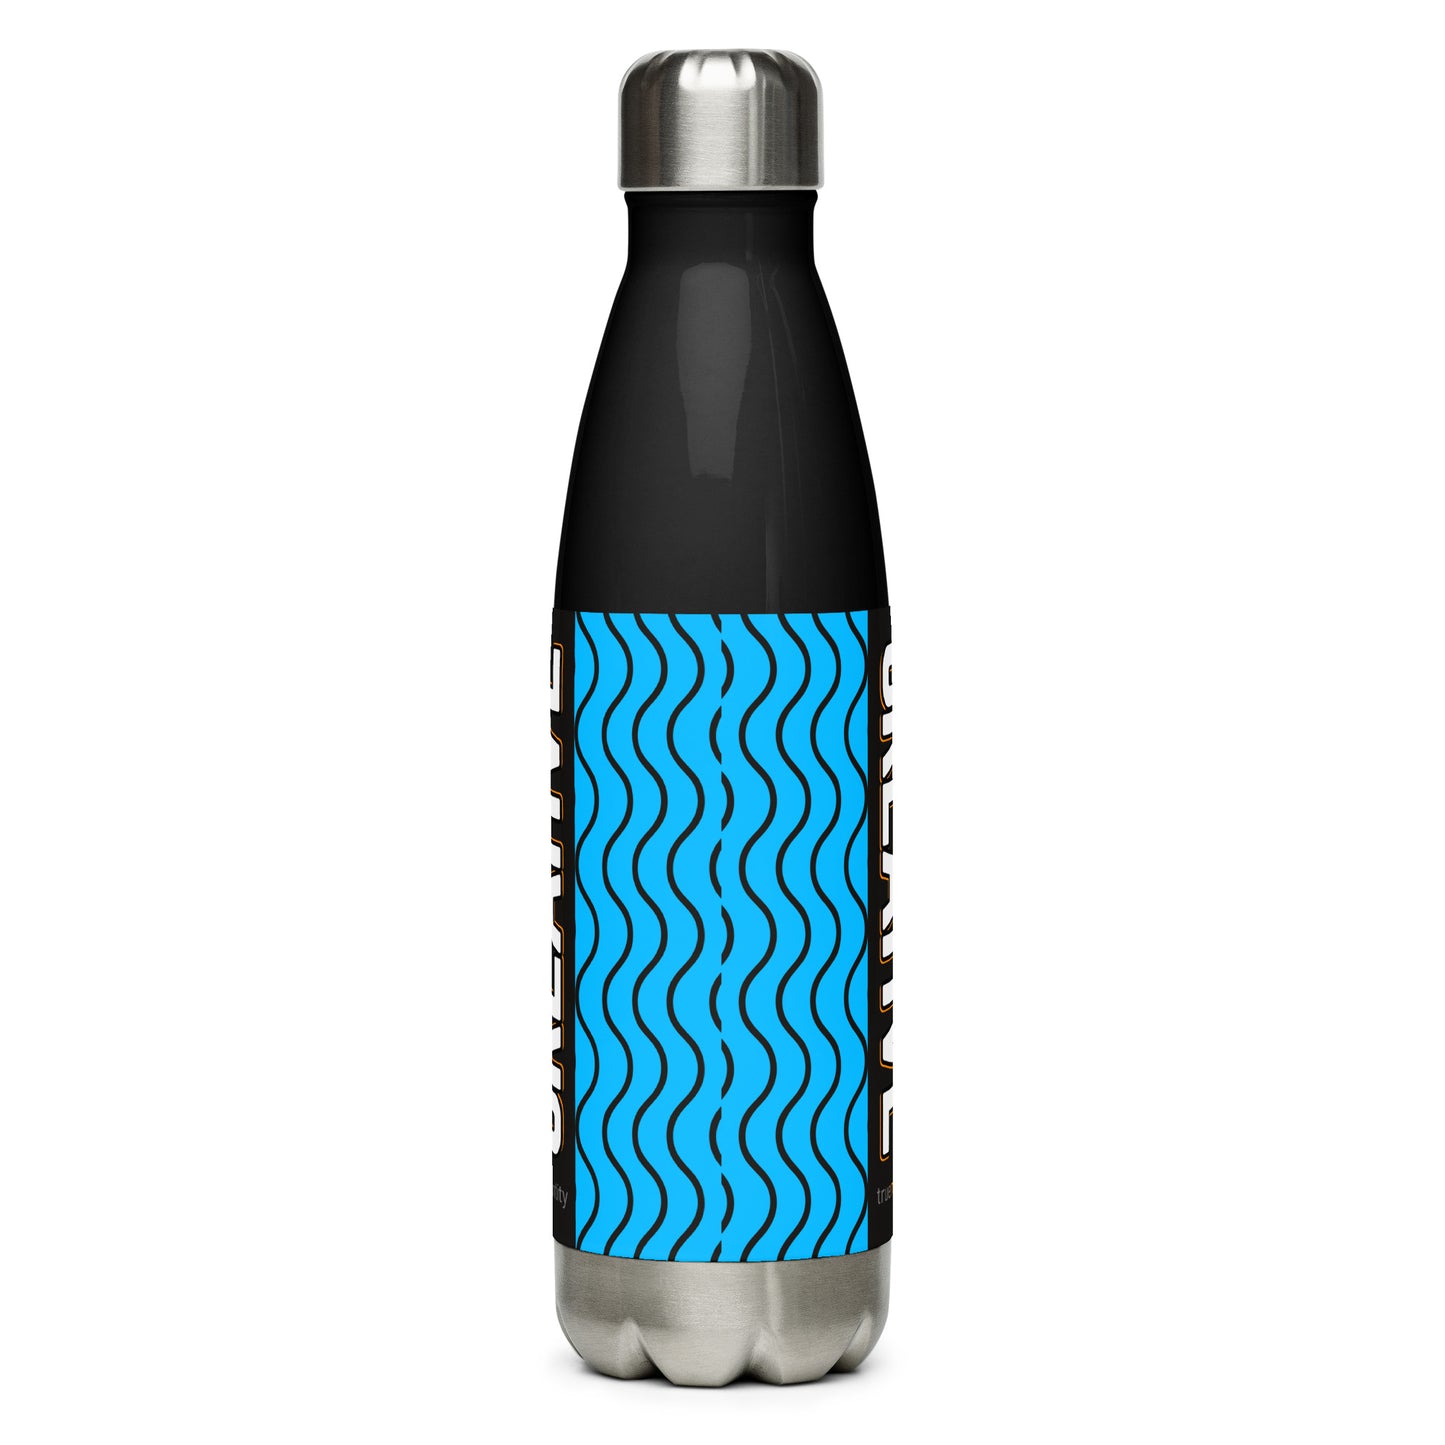 CREATIVE Stainless Steel Water Bottle Blue Wave Design, 17 oz, in Black or White